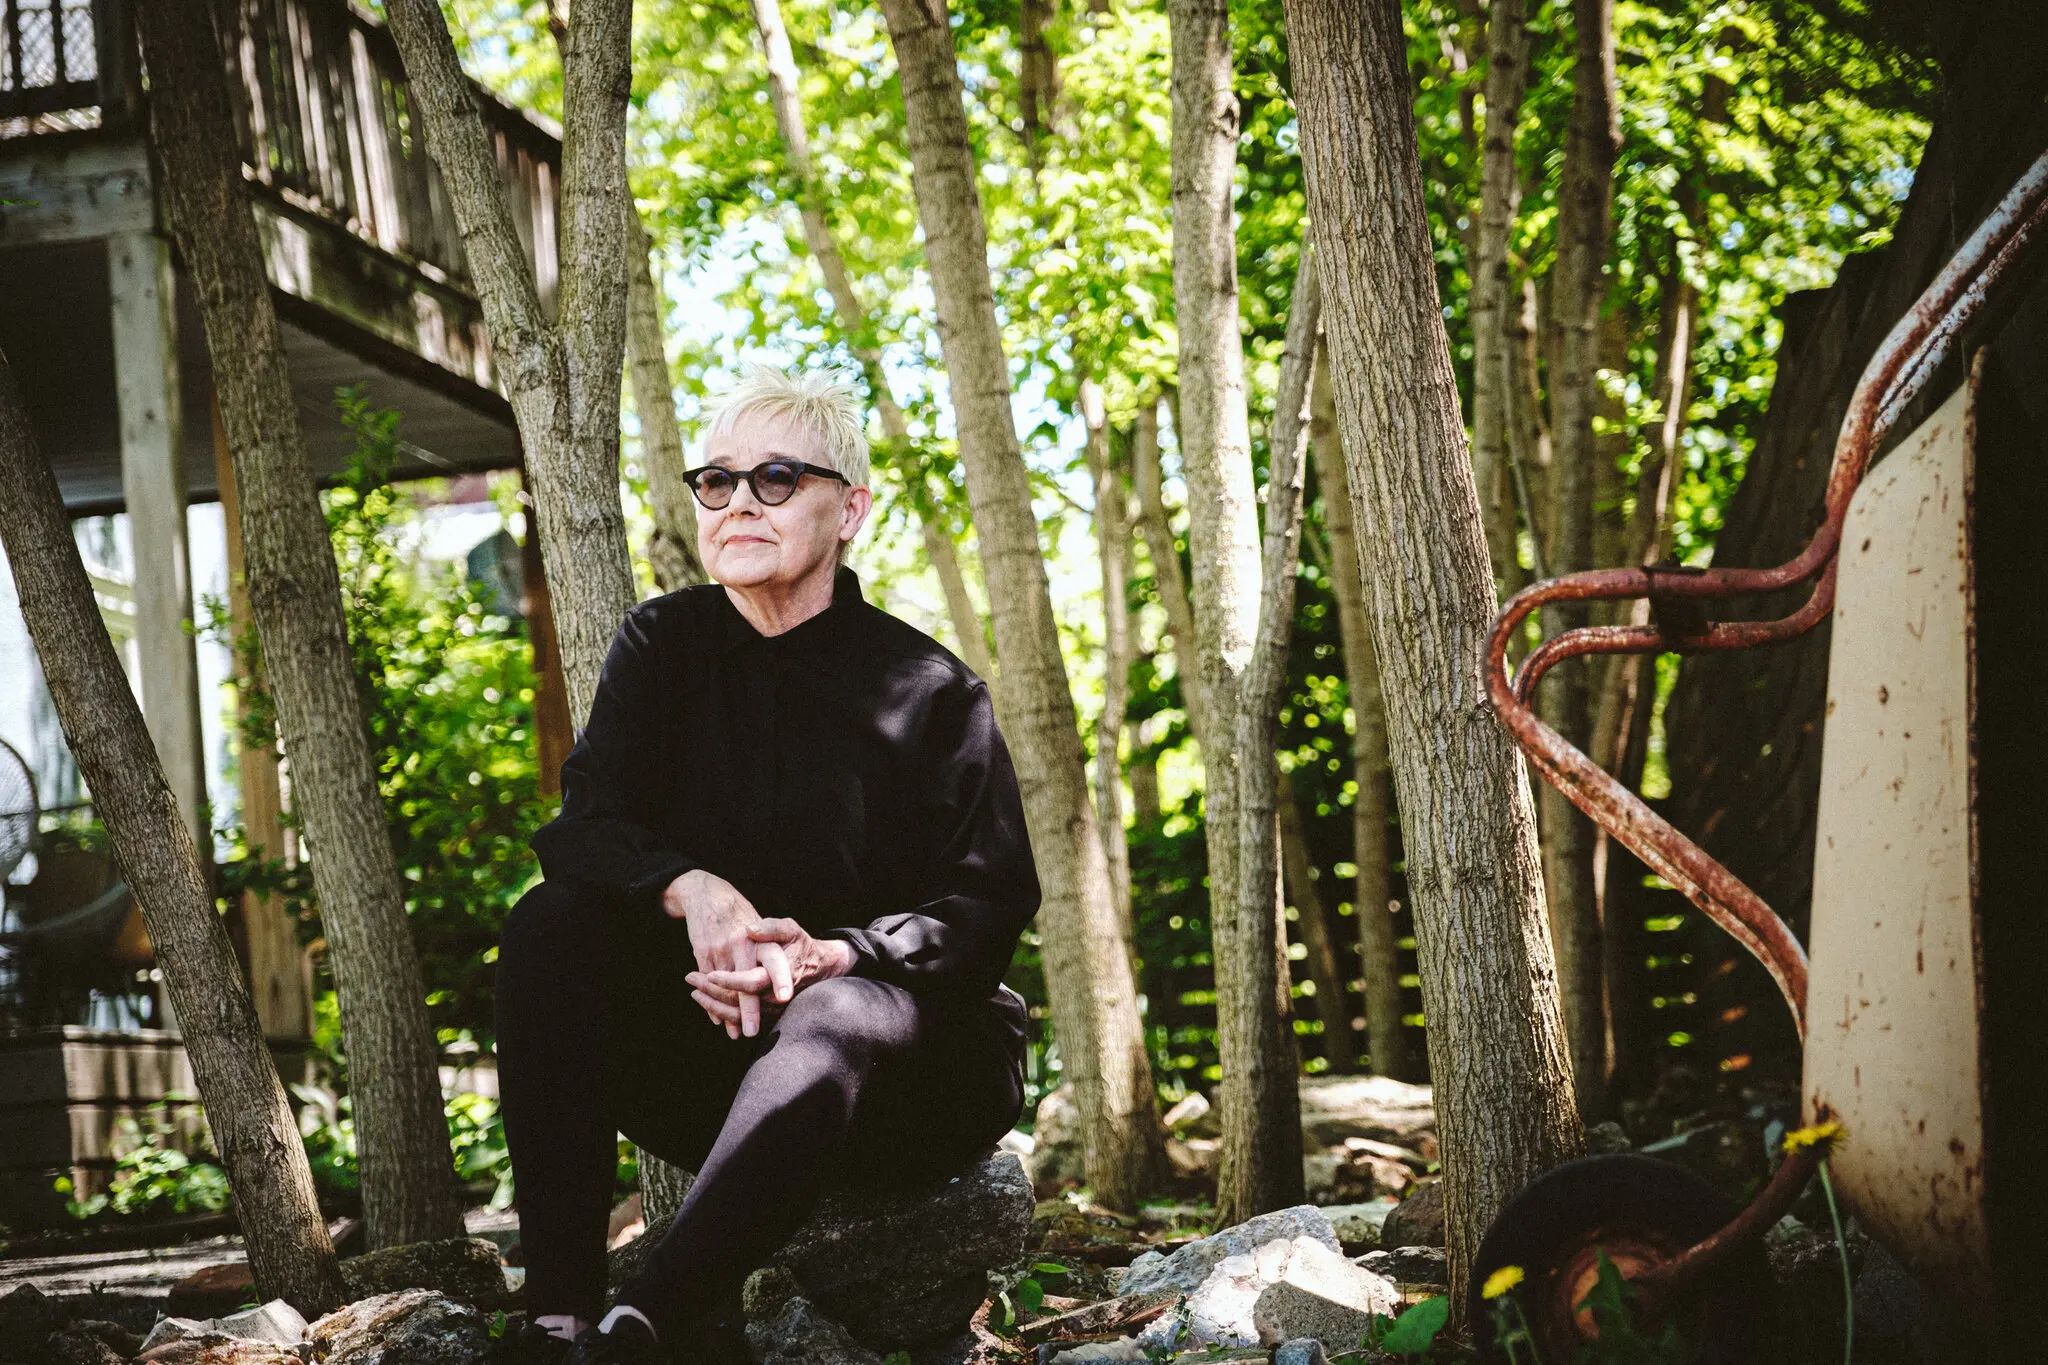 Julie Bargmann in her “debris garden” outside her home in Charlottesville, Va.Credit...Eze Amos for The New York Times